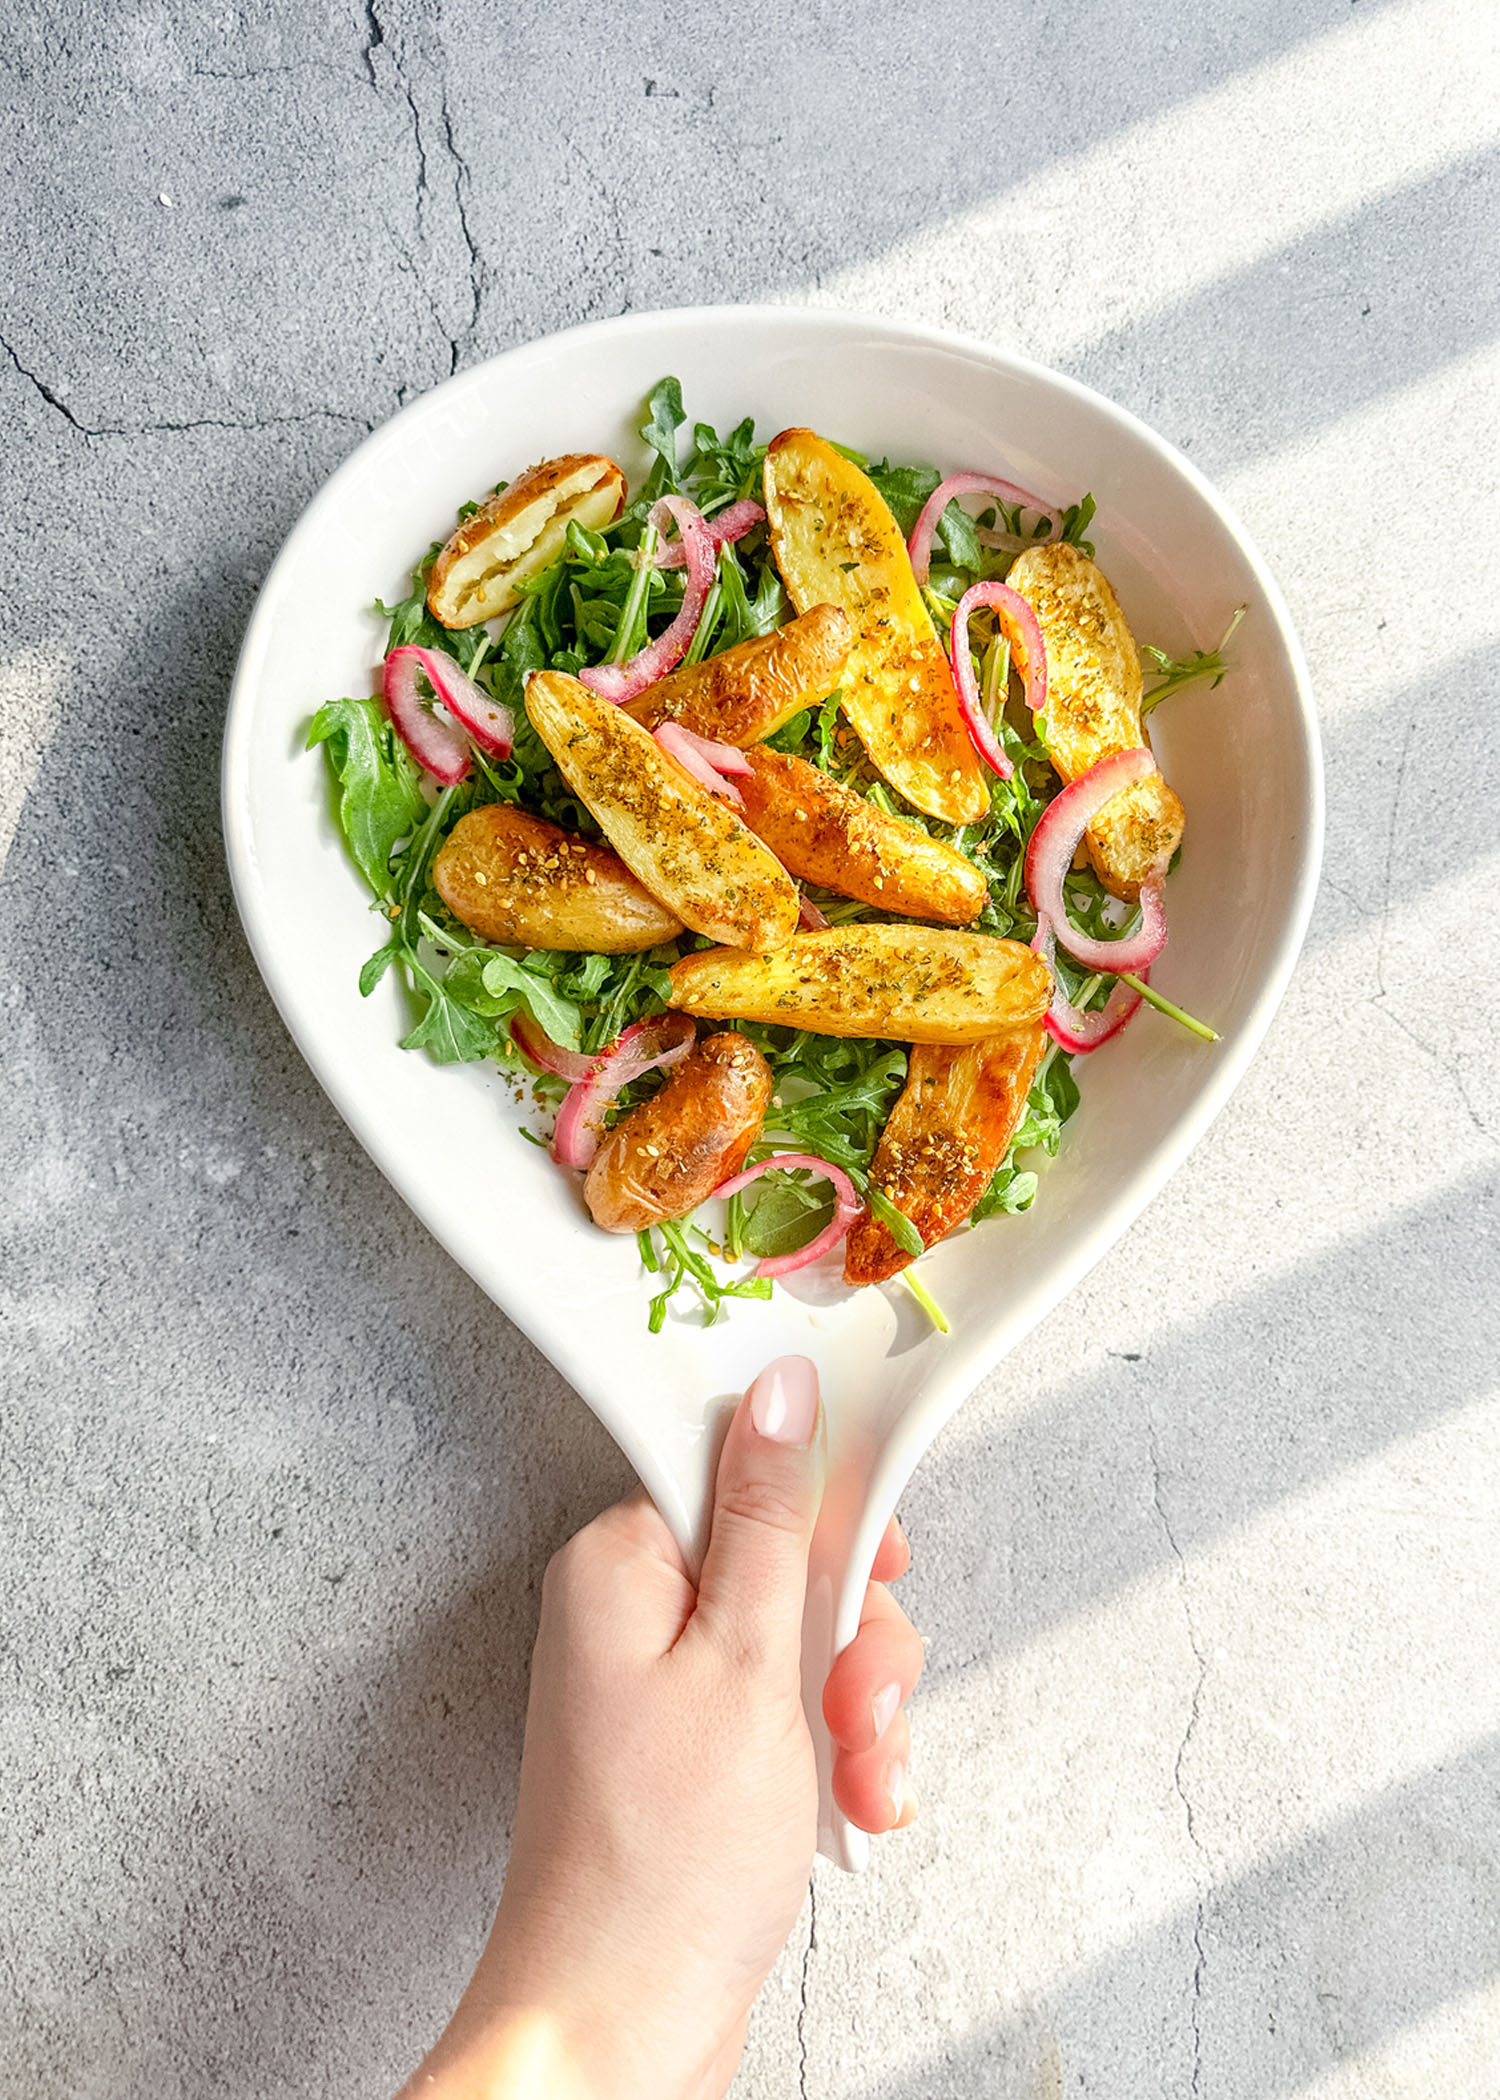 Roasted Fingerling Salad with Pickedled Red Onions and Arugula